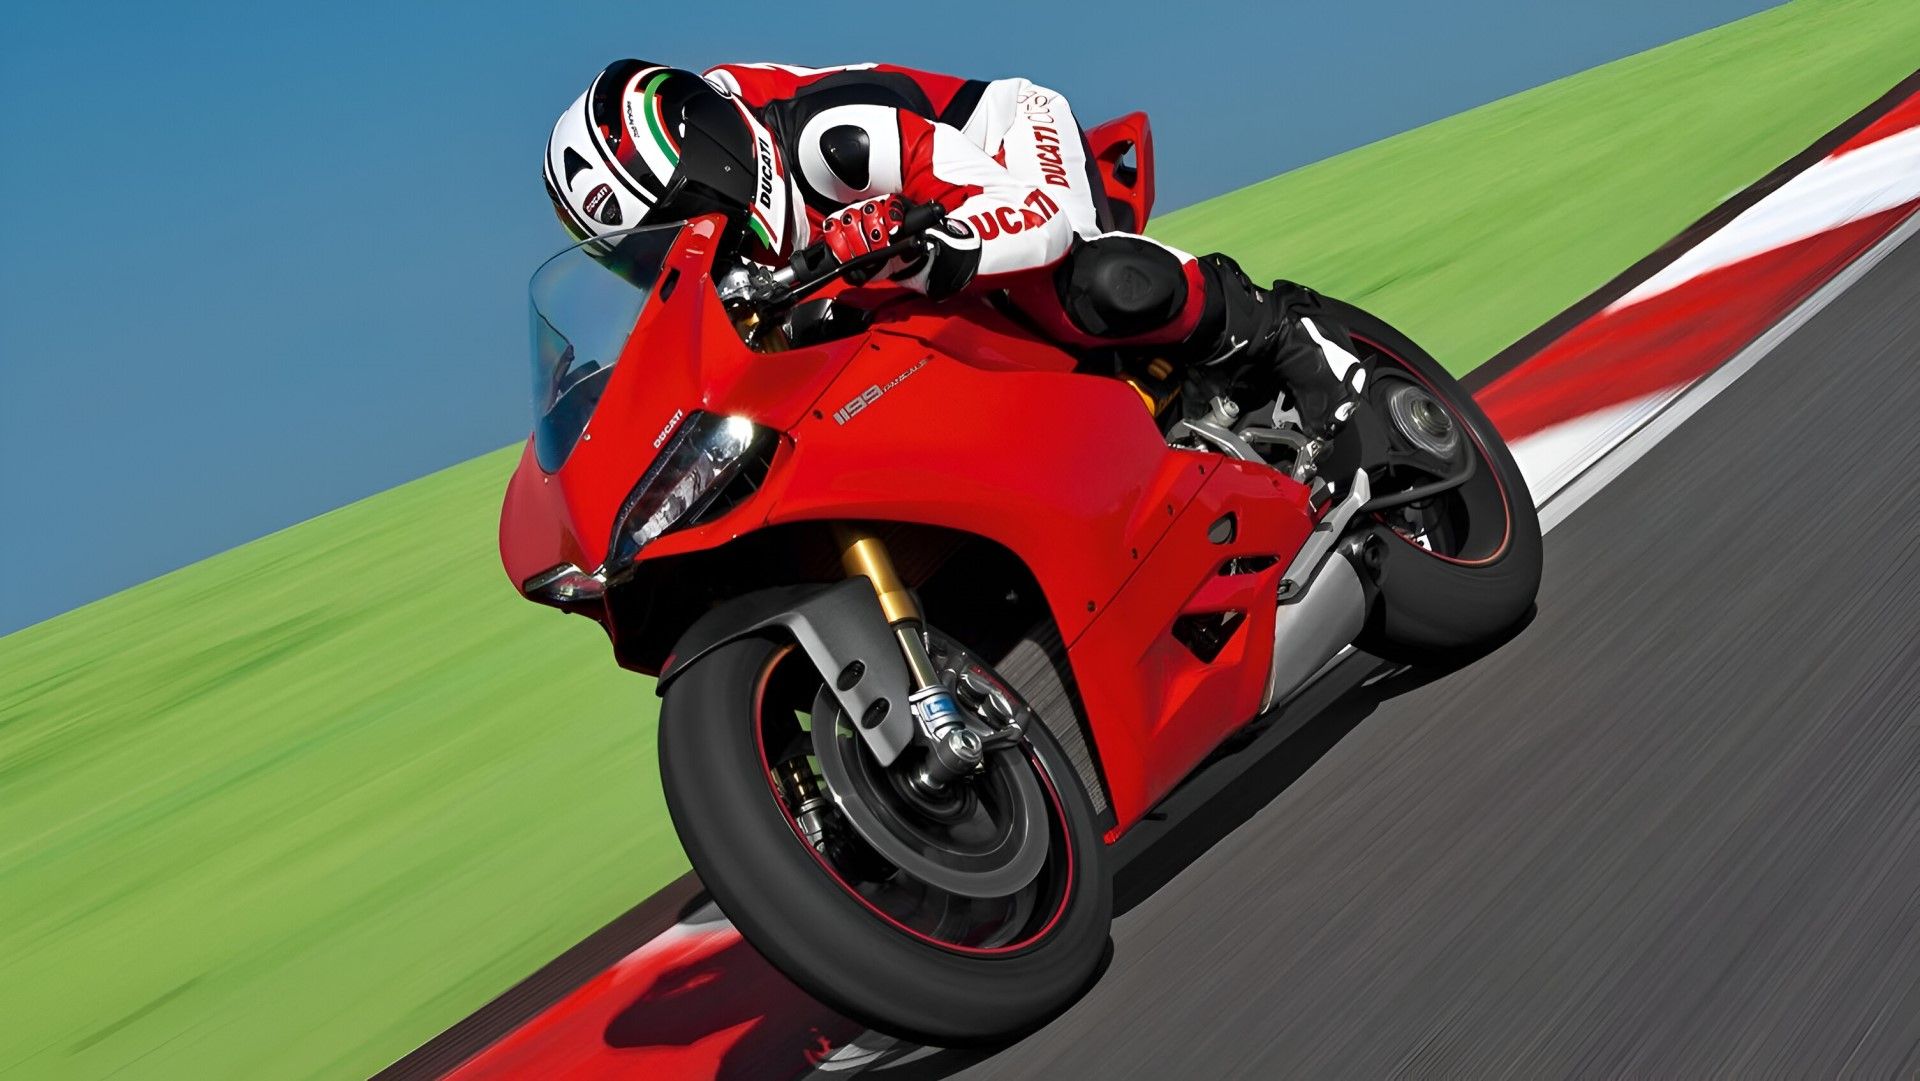 Ducati 1199 Panigale accelerating on track